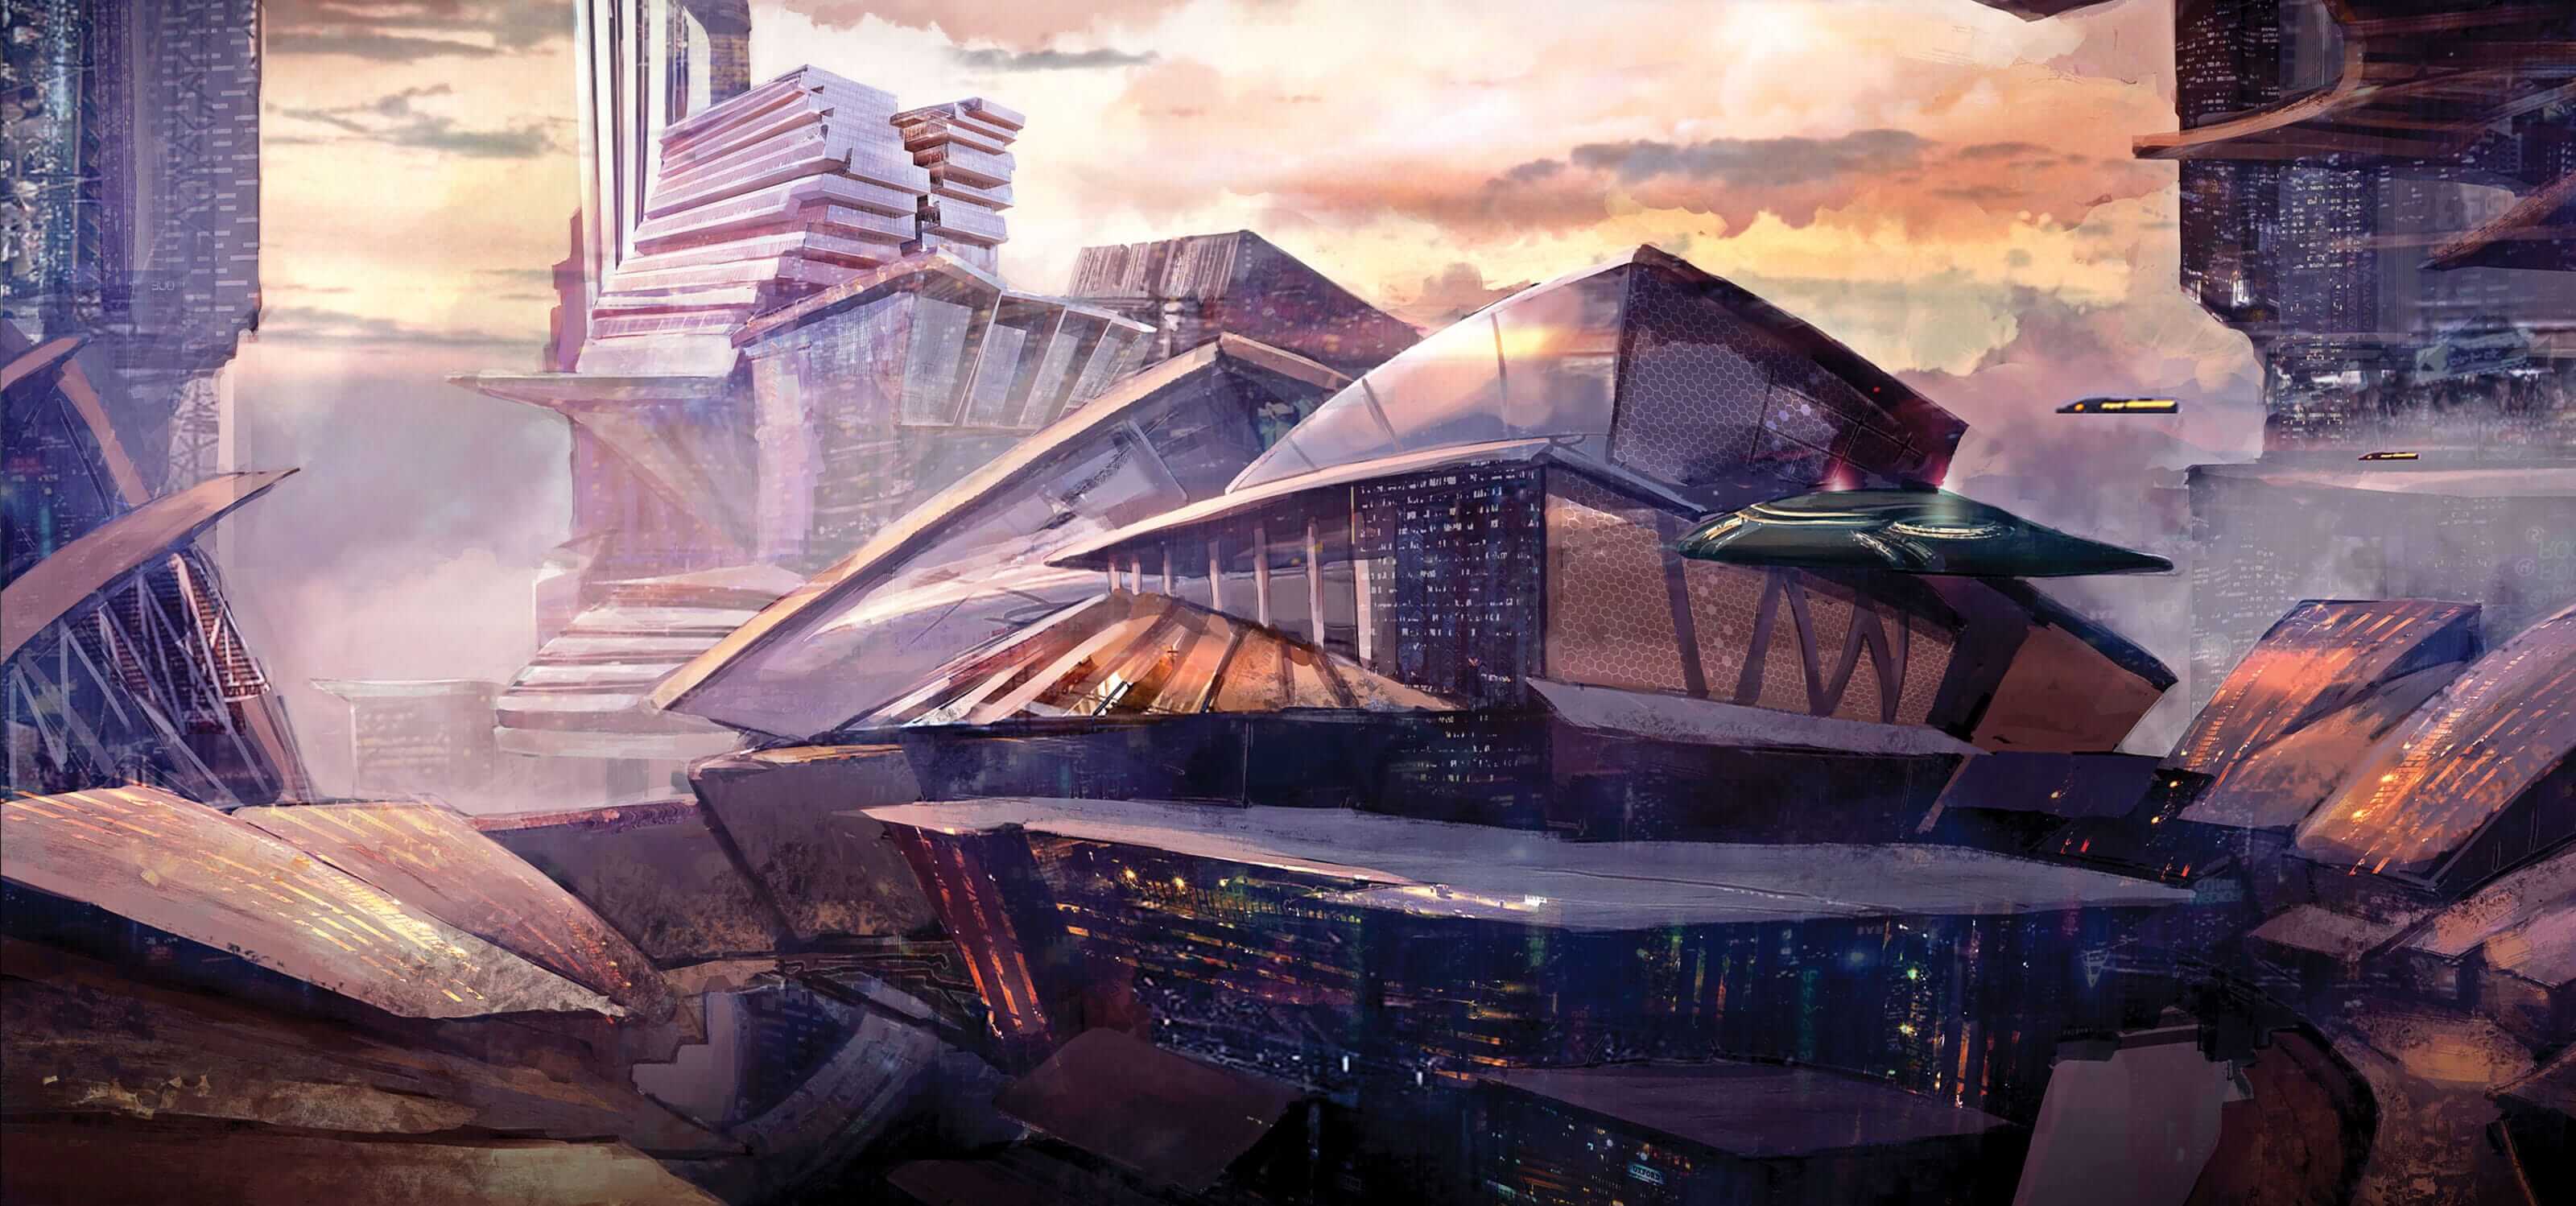 Digital painting of a futuristic cityscape with spaceships flying past a large building